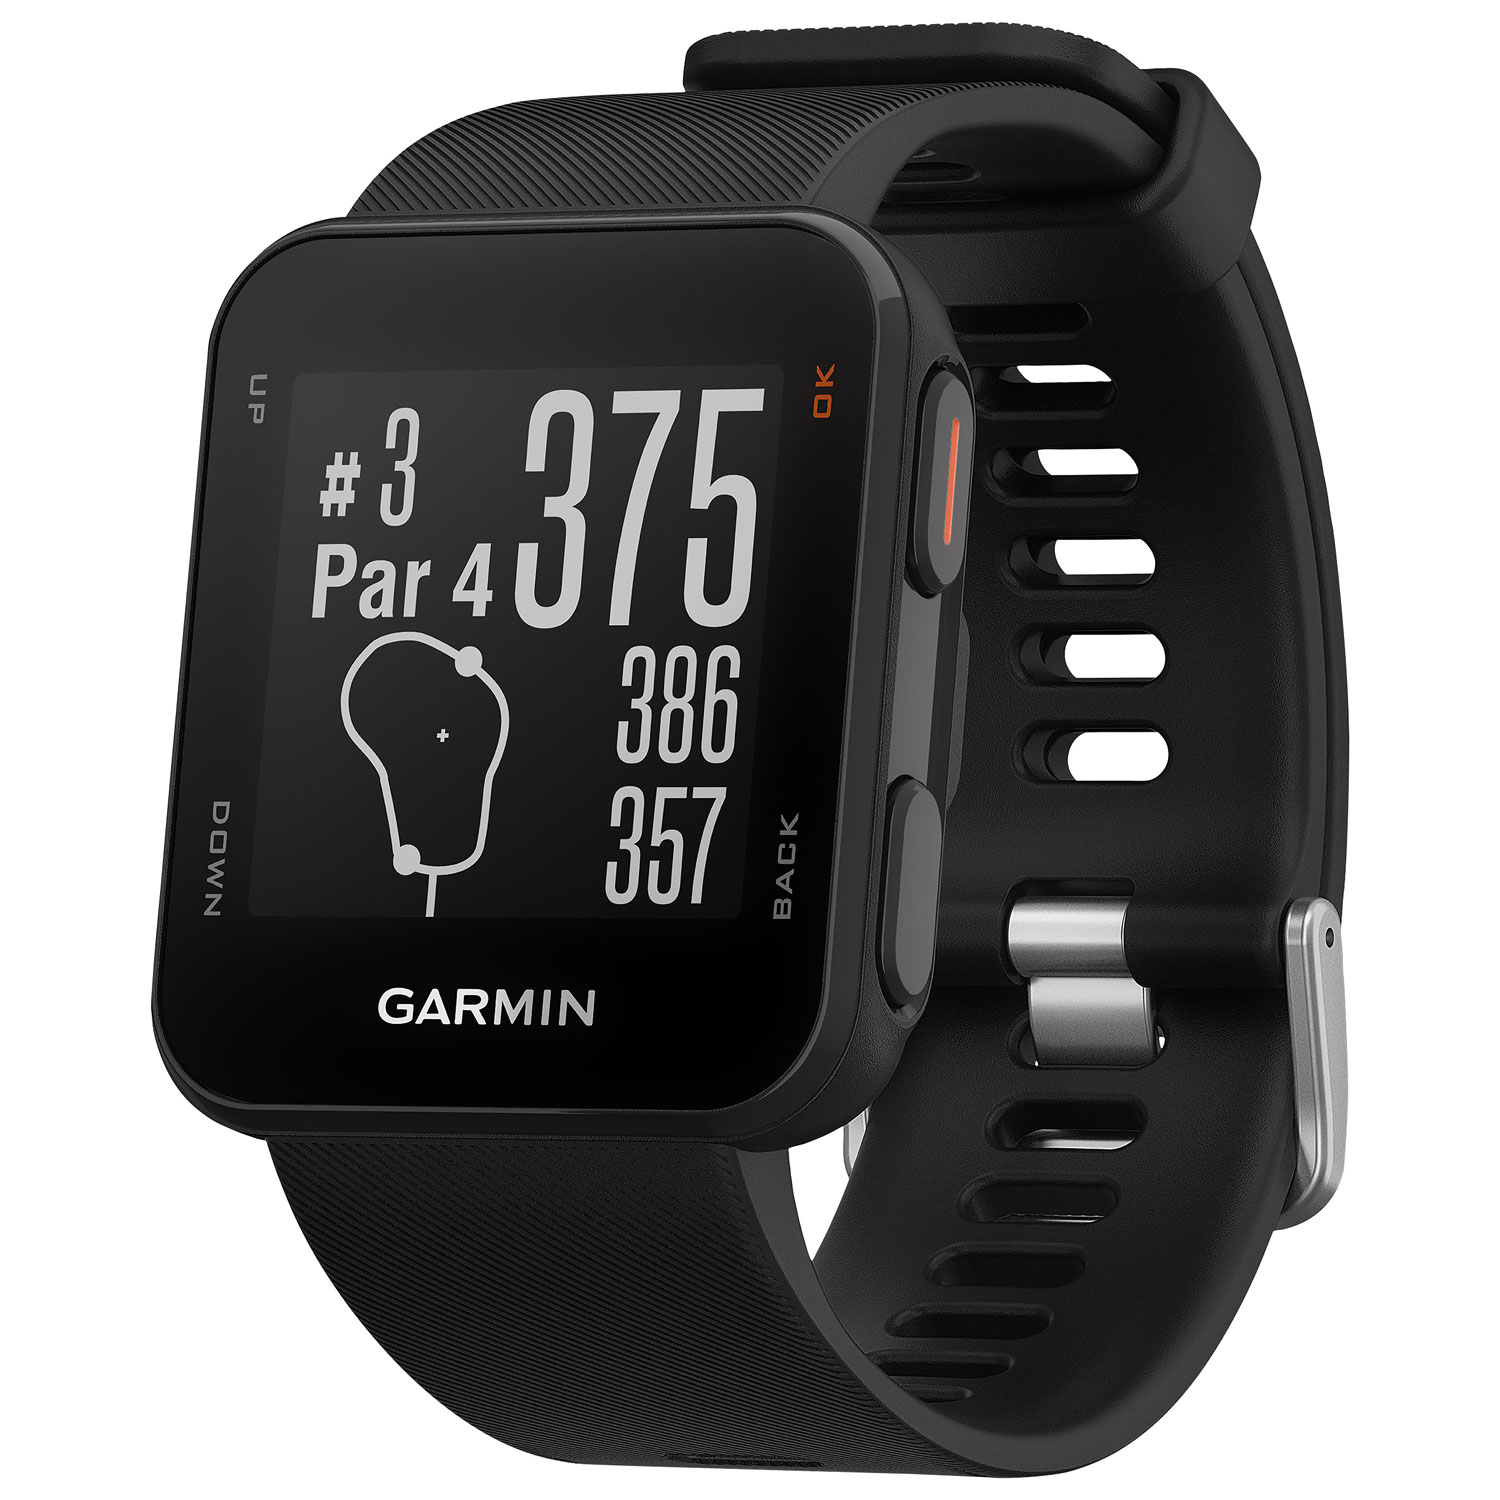 Garmin Approach S10 Golf Watch with Preloaded Courses - Black